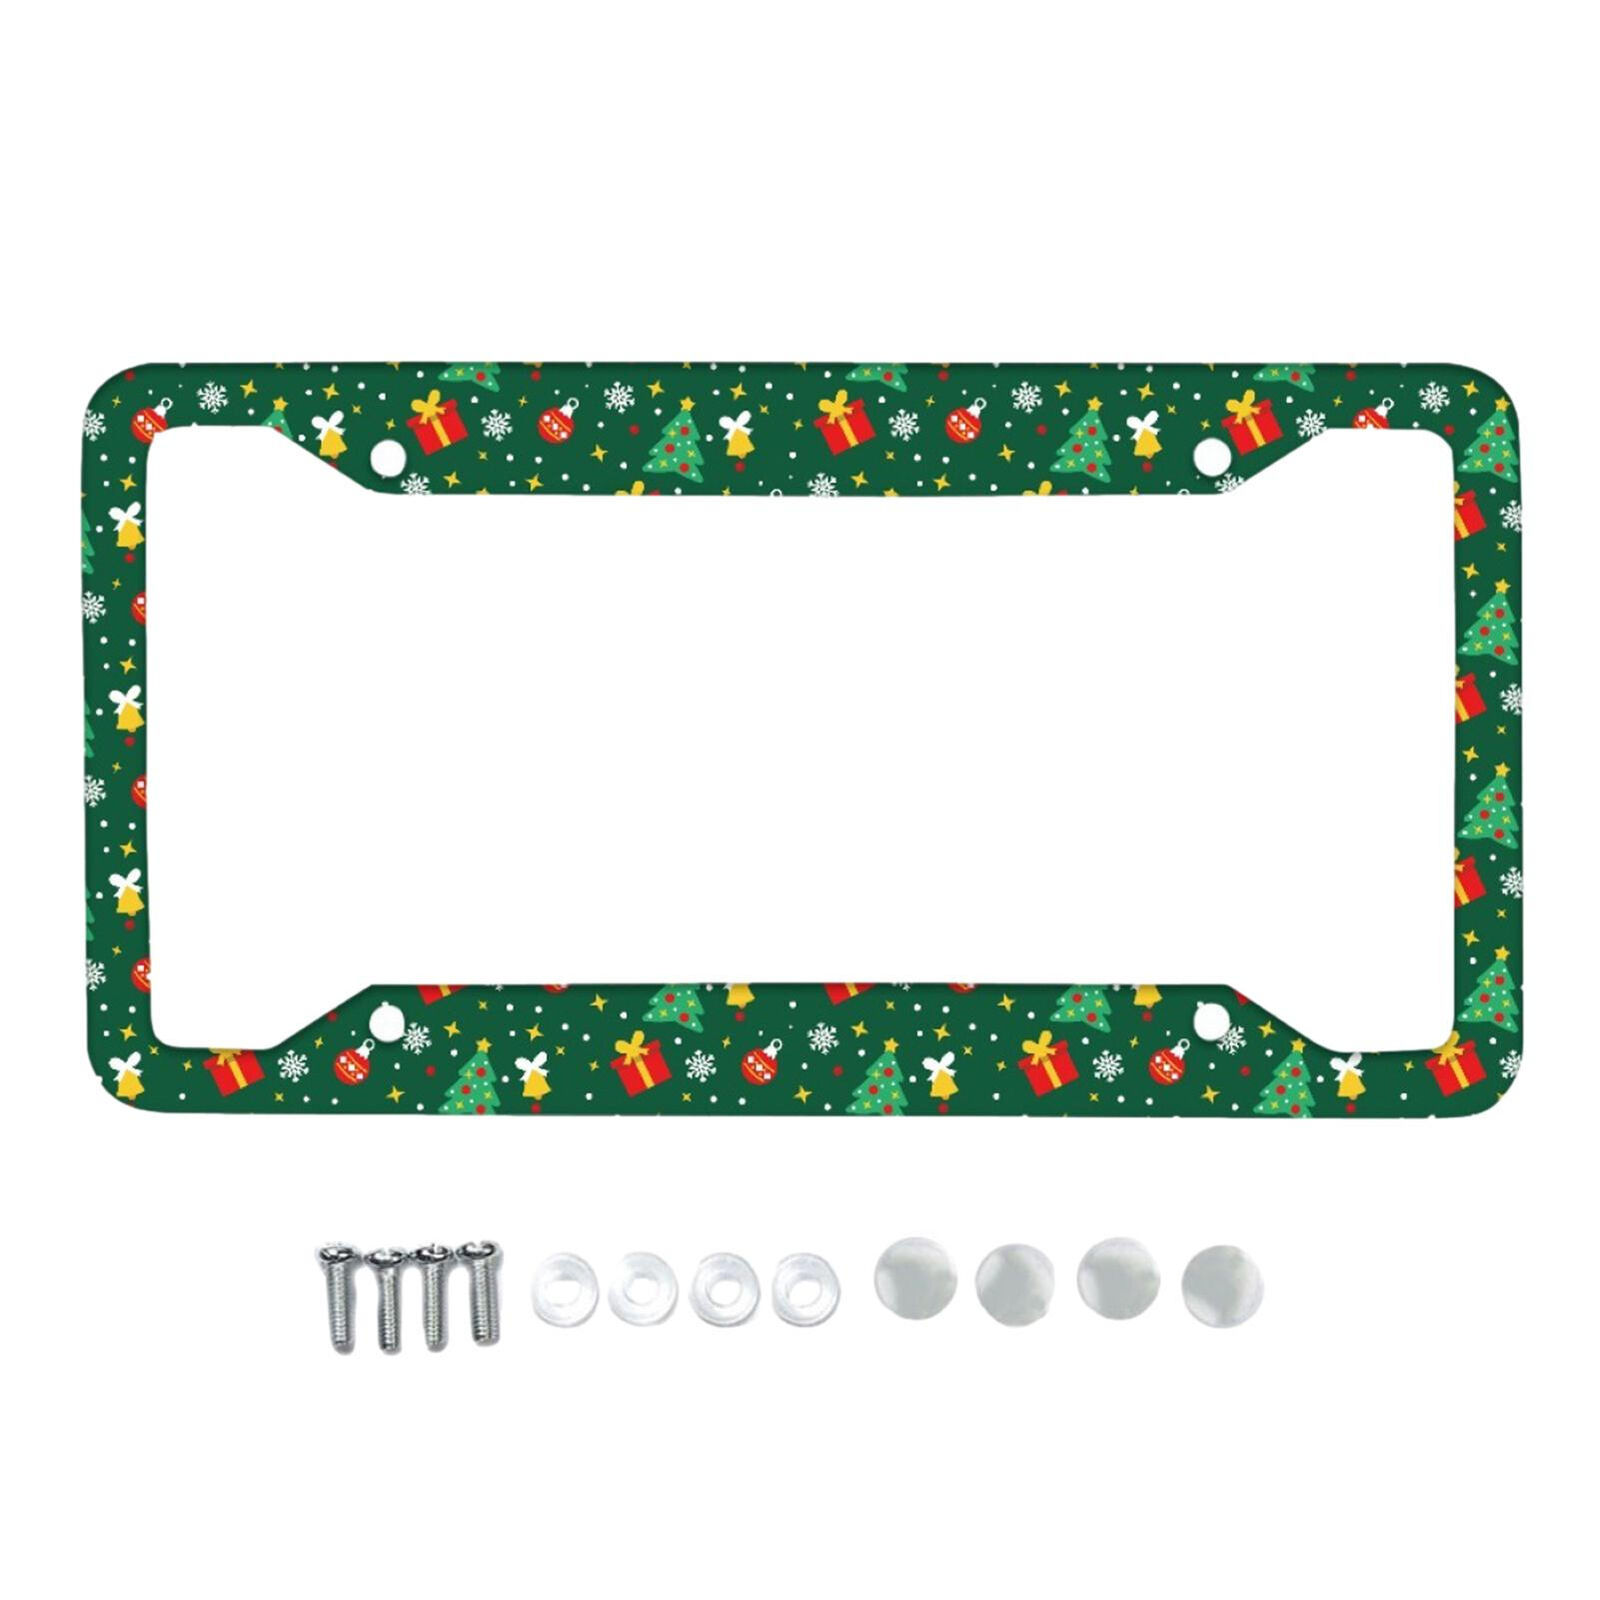 Decorative License Plate Holder Colorful Frame Christmas Car Universal Accessory